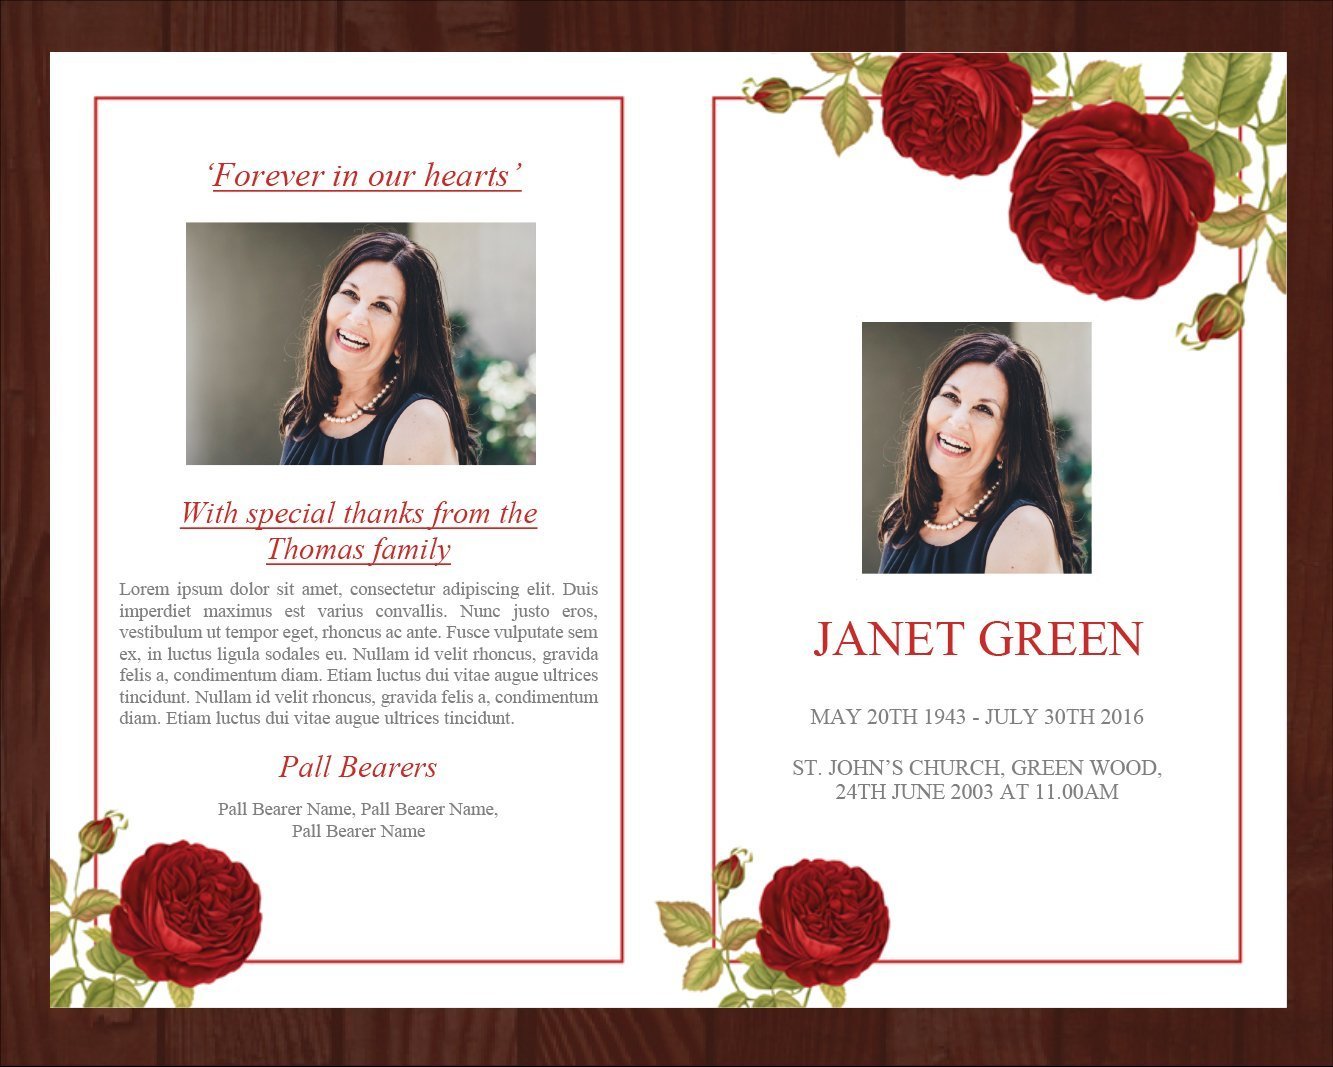 4 Page Red Rose Funeral Program Template + Prayer Card